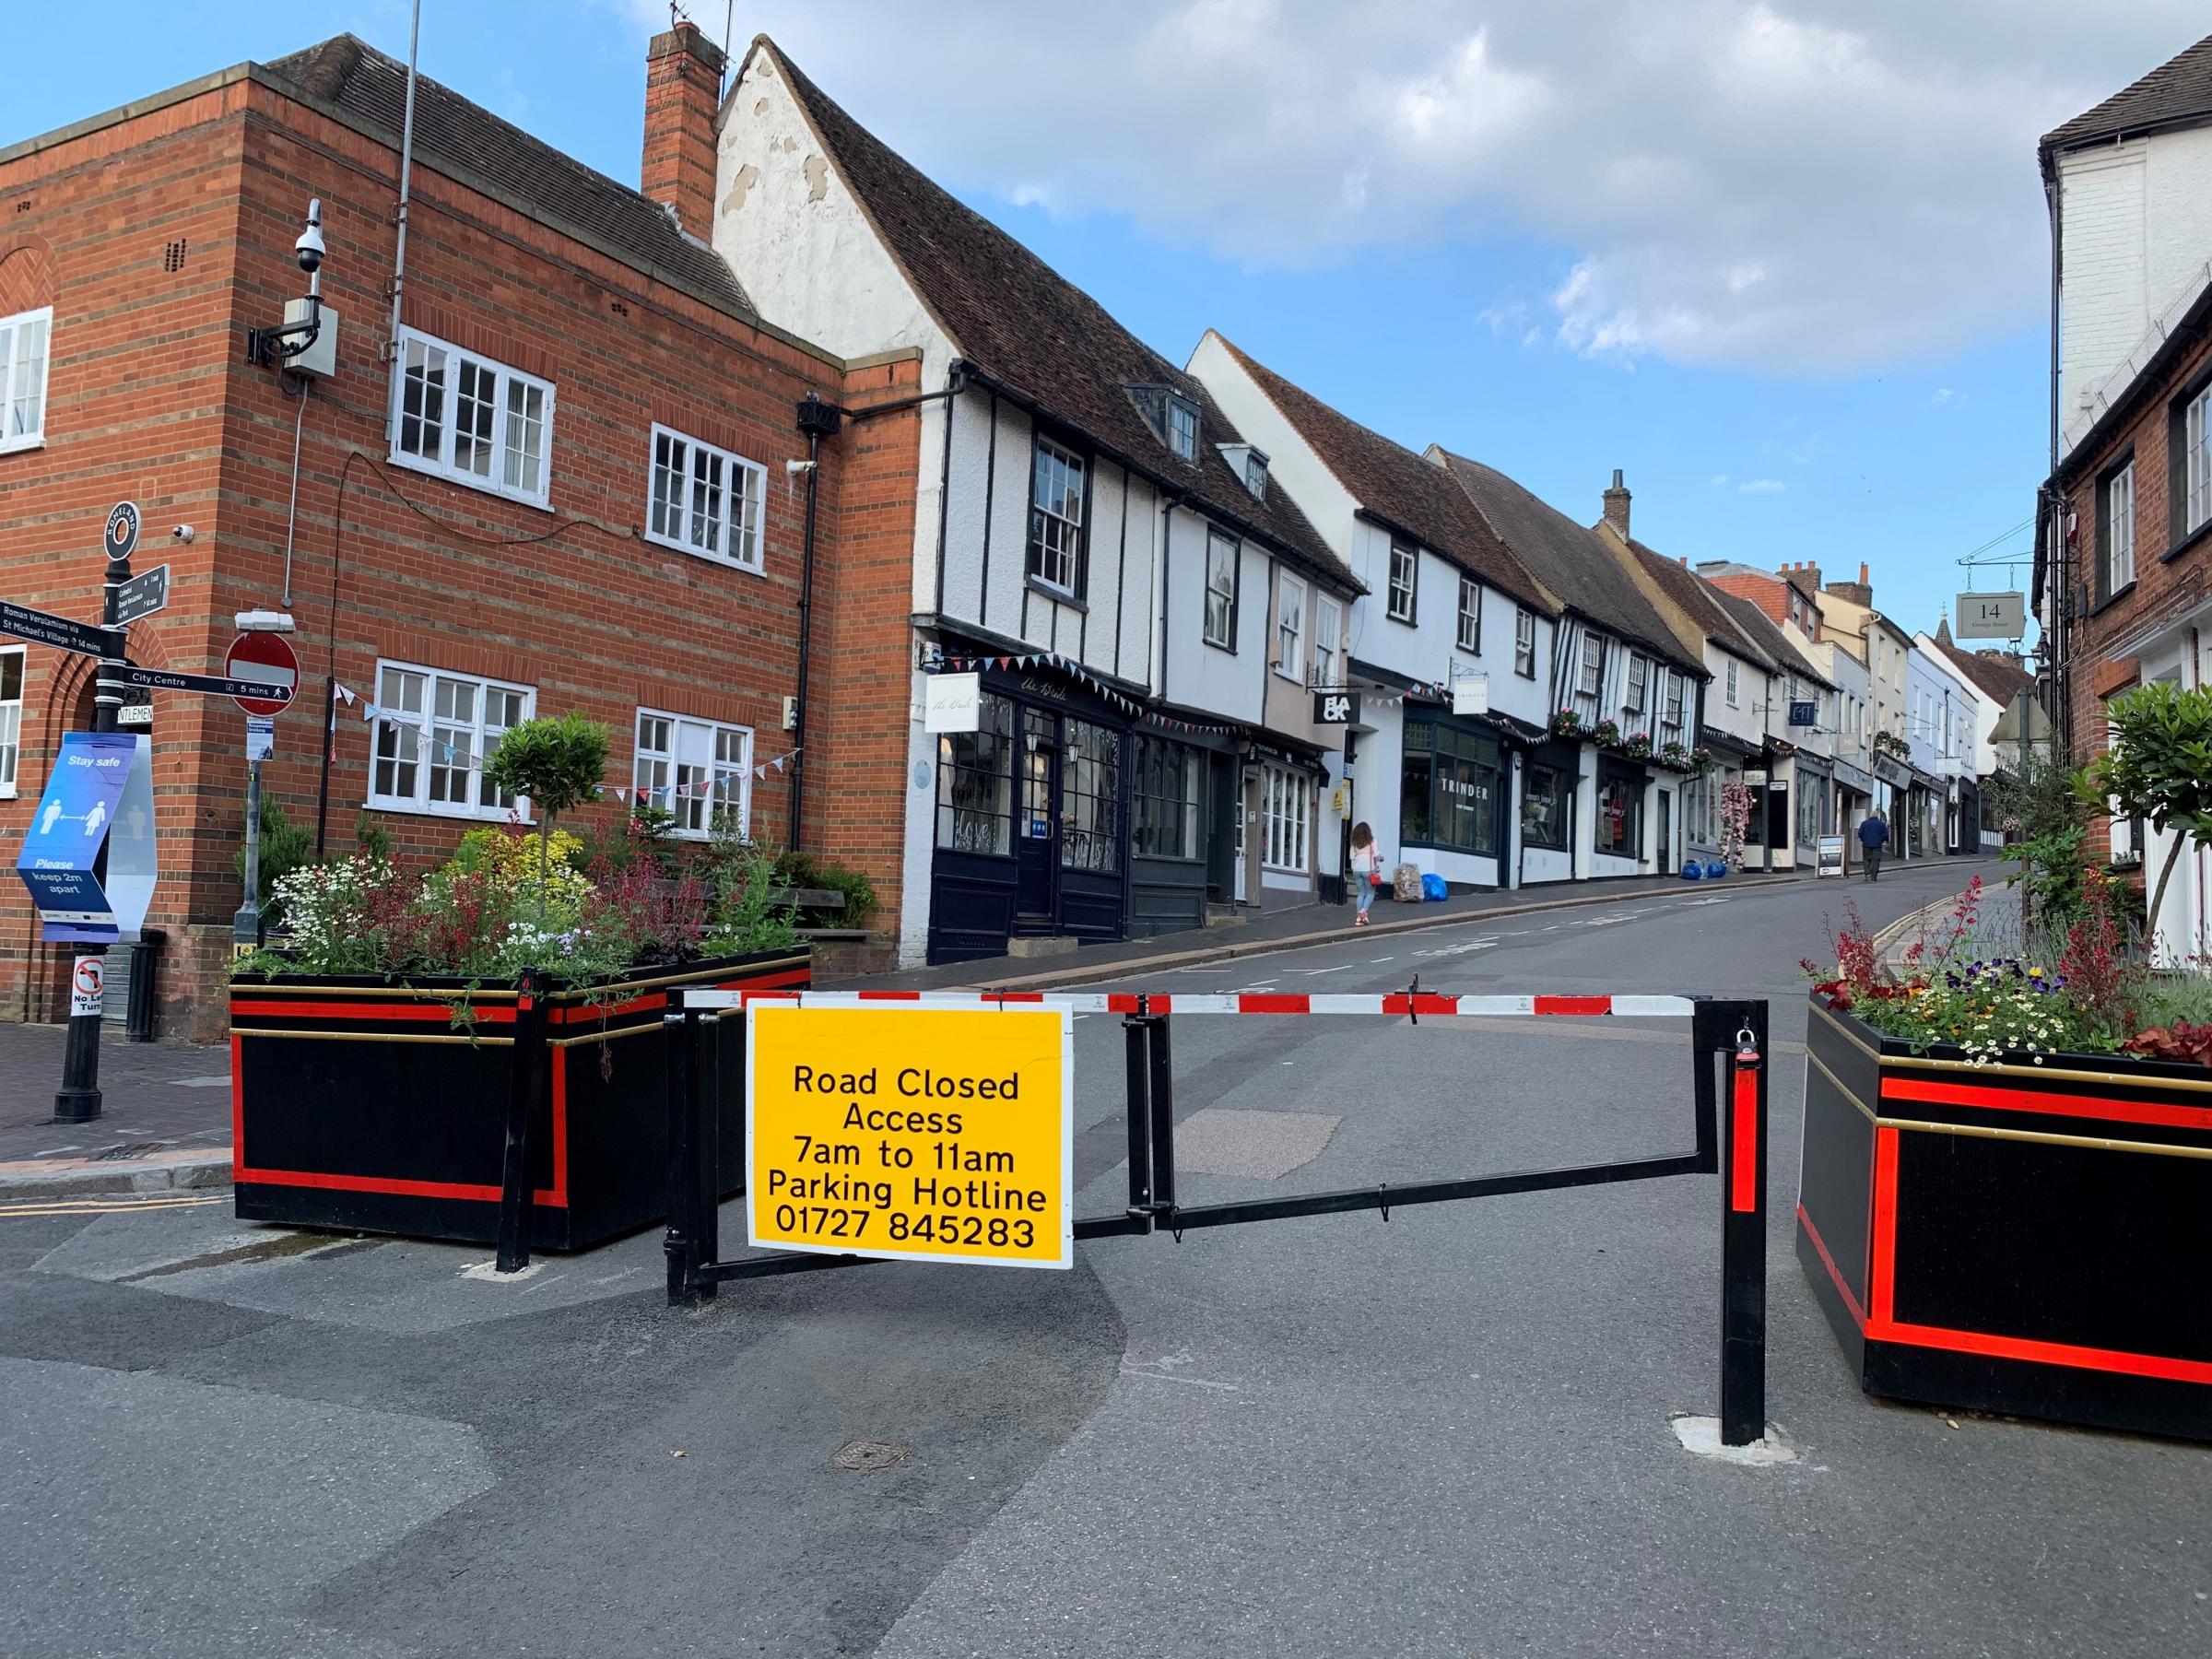 Covid-related road closures such as this in George Street, St Albans, are often still in place